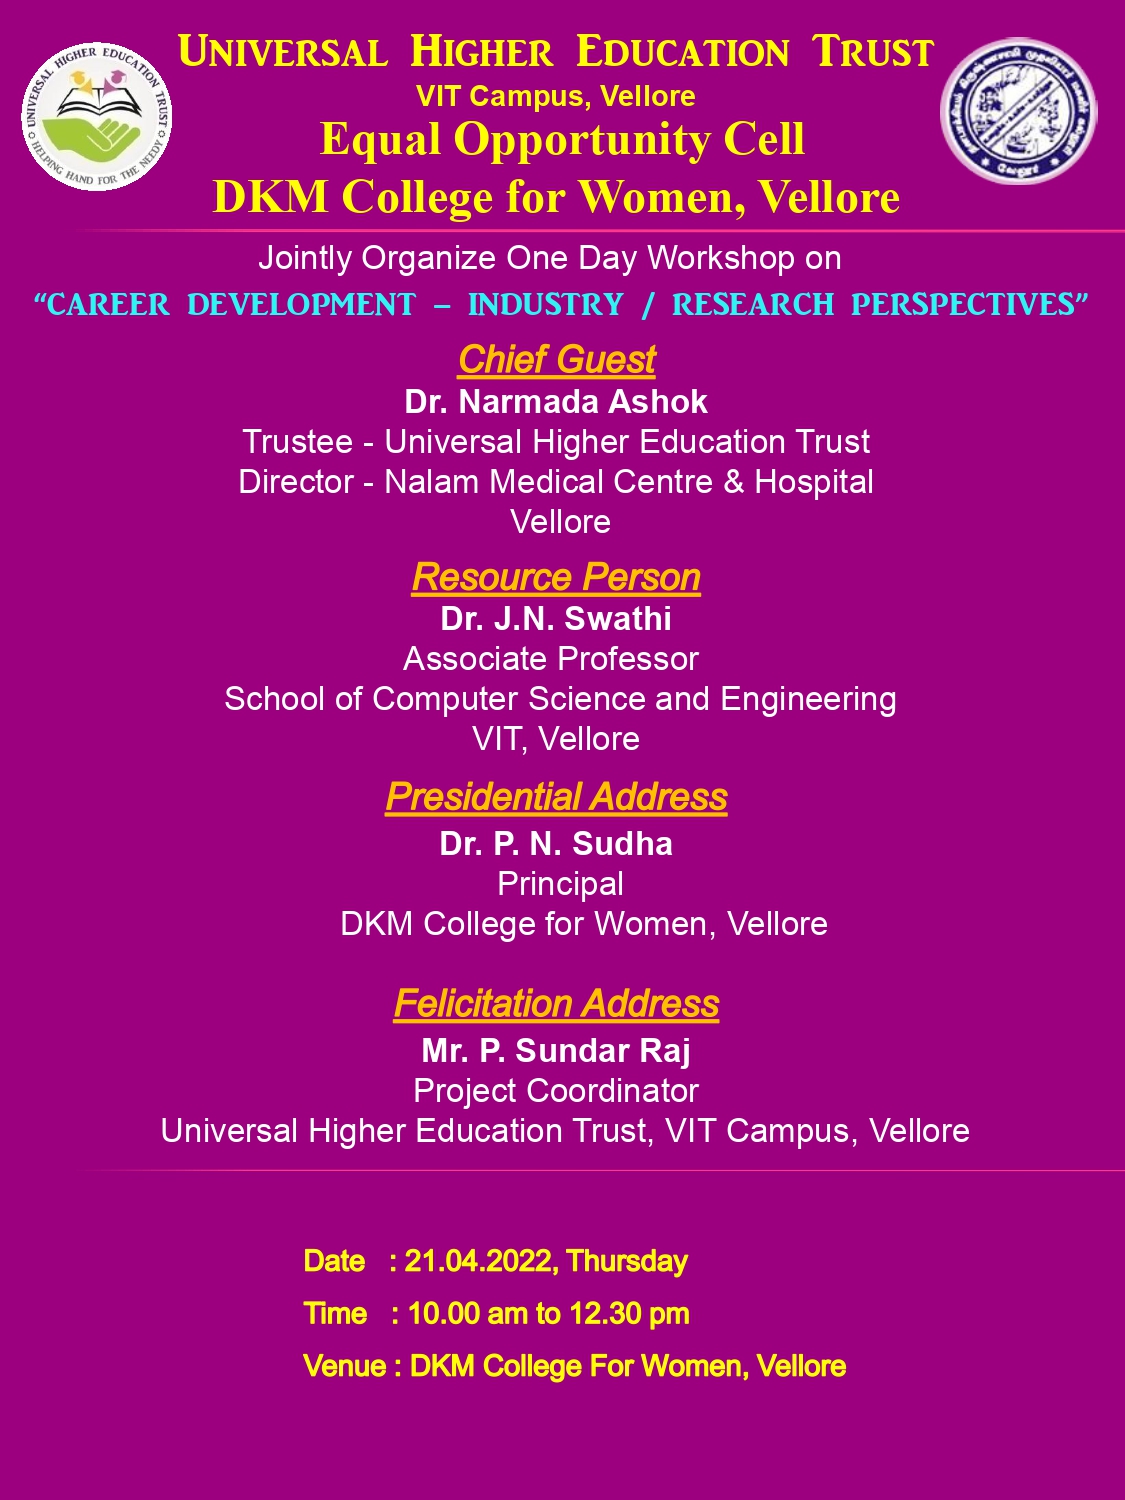 7. UHET & DKM College Workshop_21.04.2022 (chief guest include)